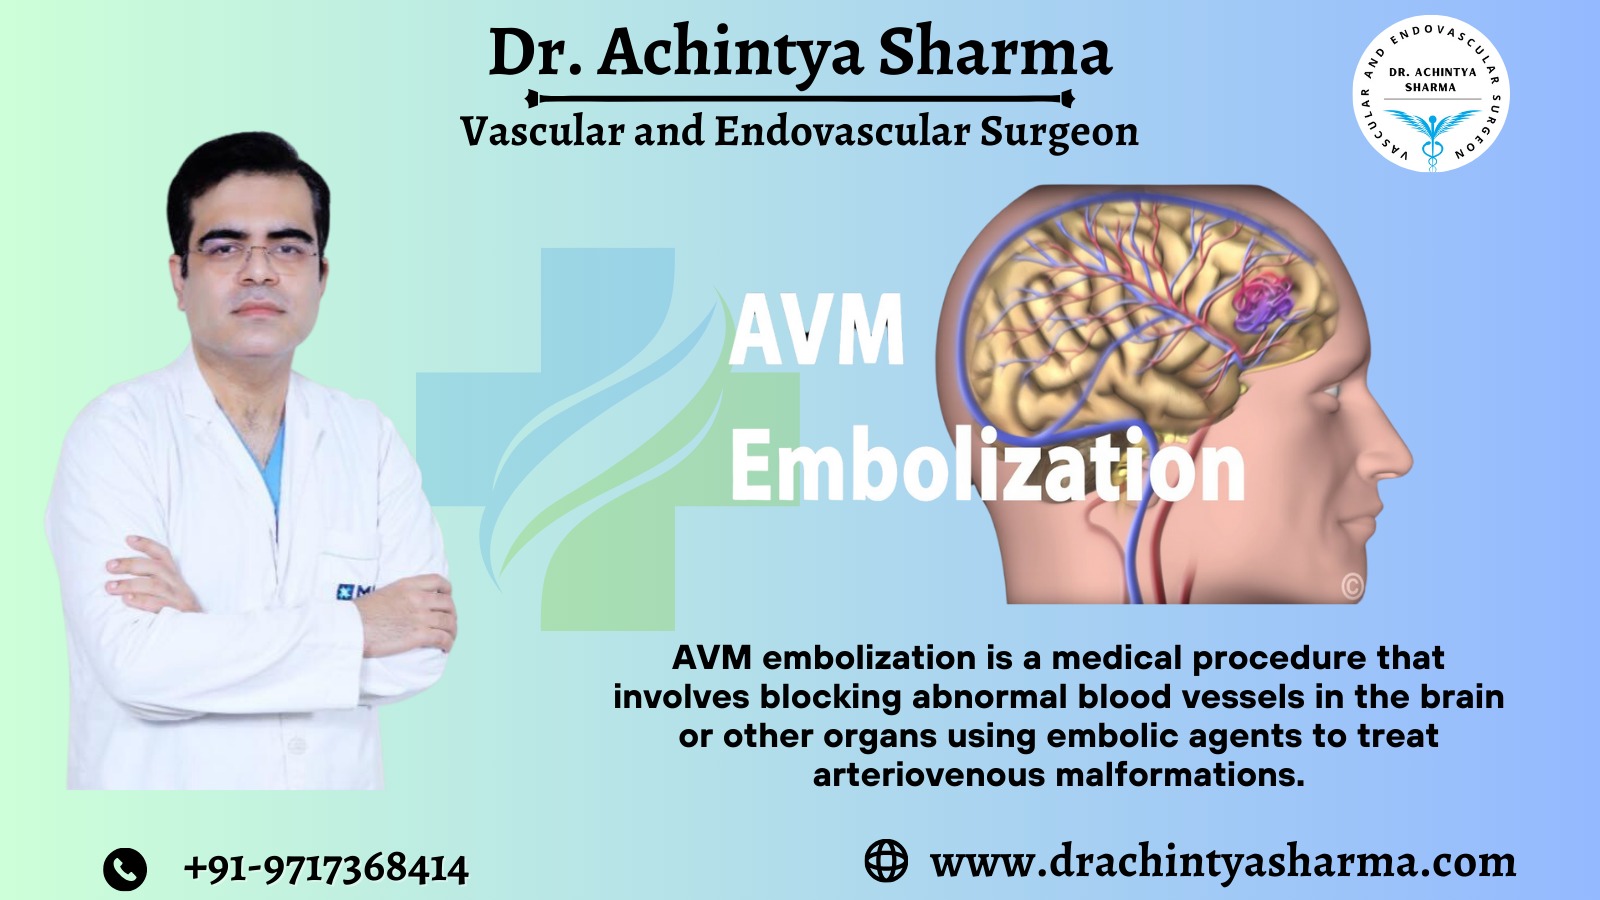 AVM Embolization As A New Treatment Due To Advances In Medical Technology